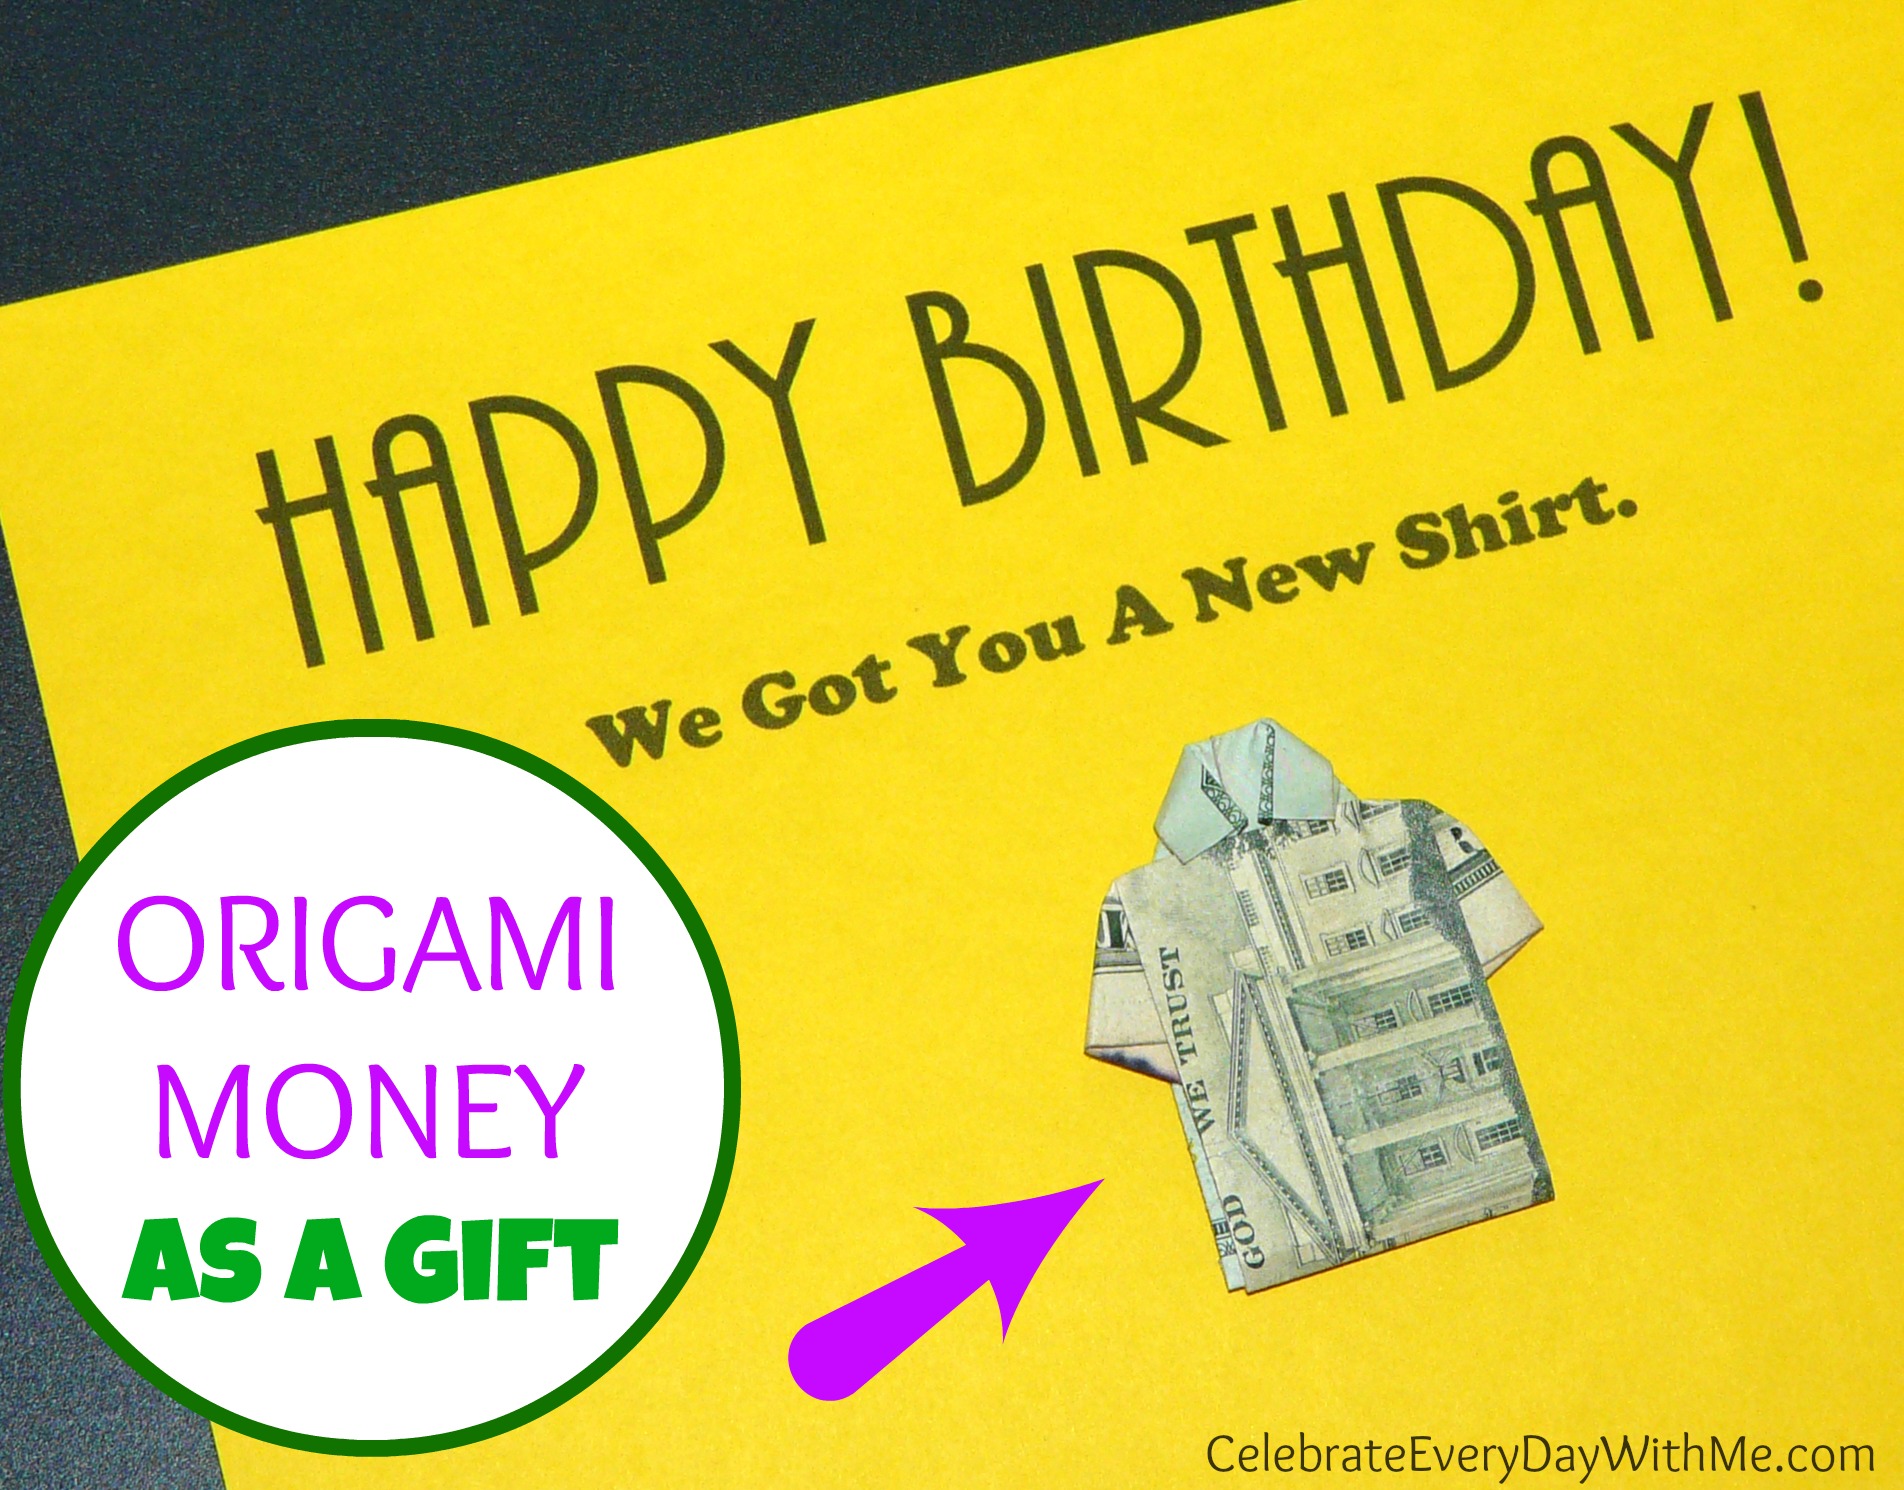 Origami Money as a Gift Celebrate Every Day With Me